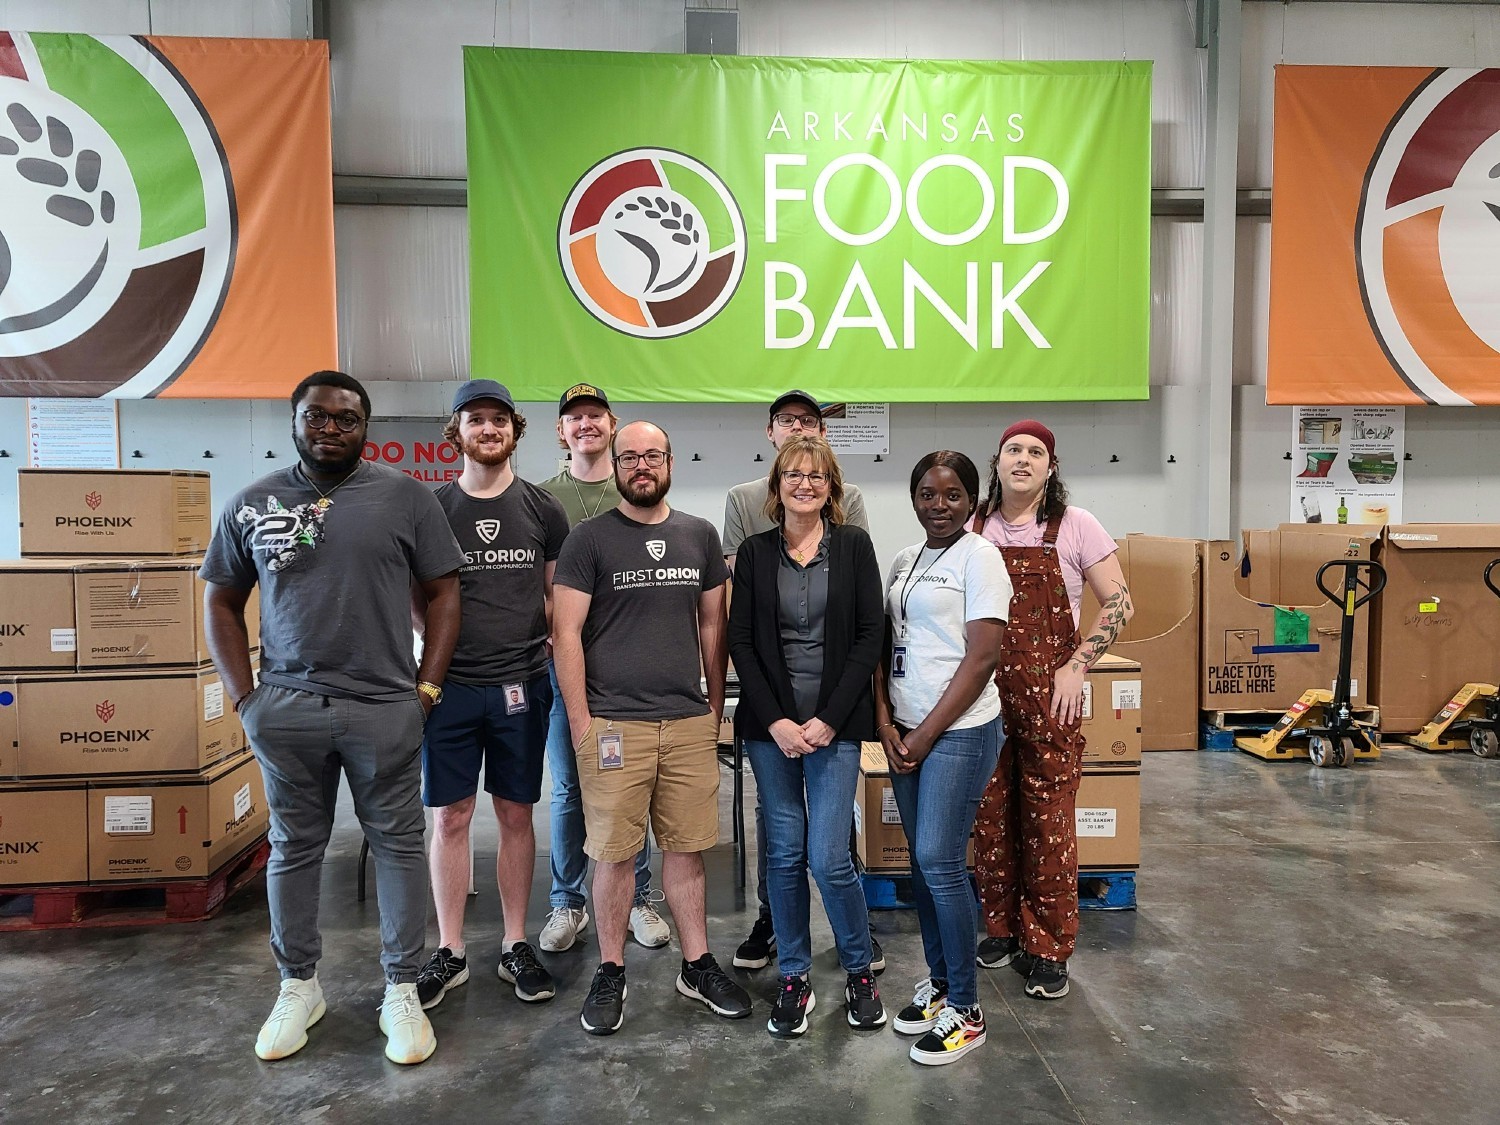 Every quarter we plan a volunteering opportunity for team members. This is us at the AR Foodbank!